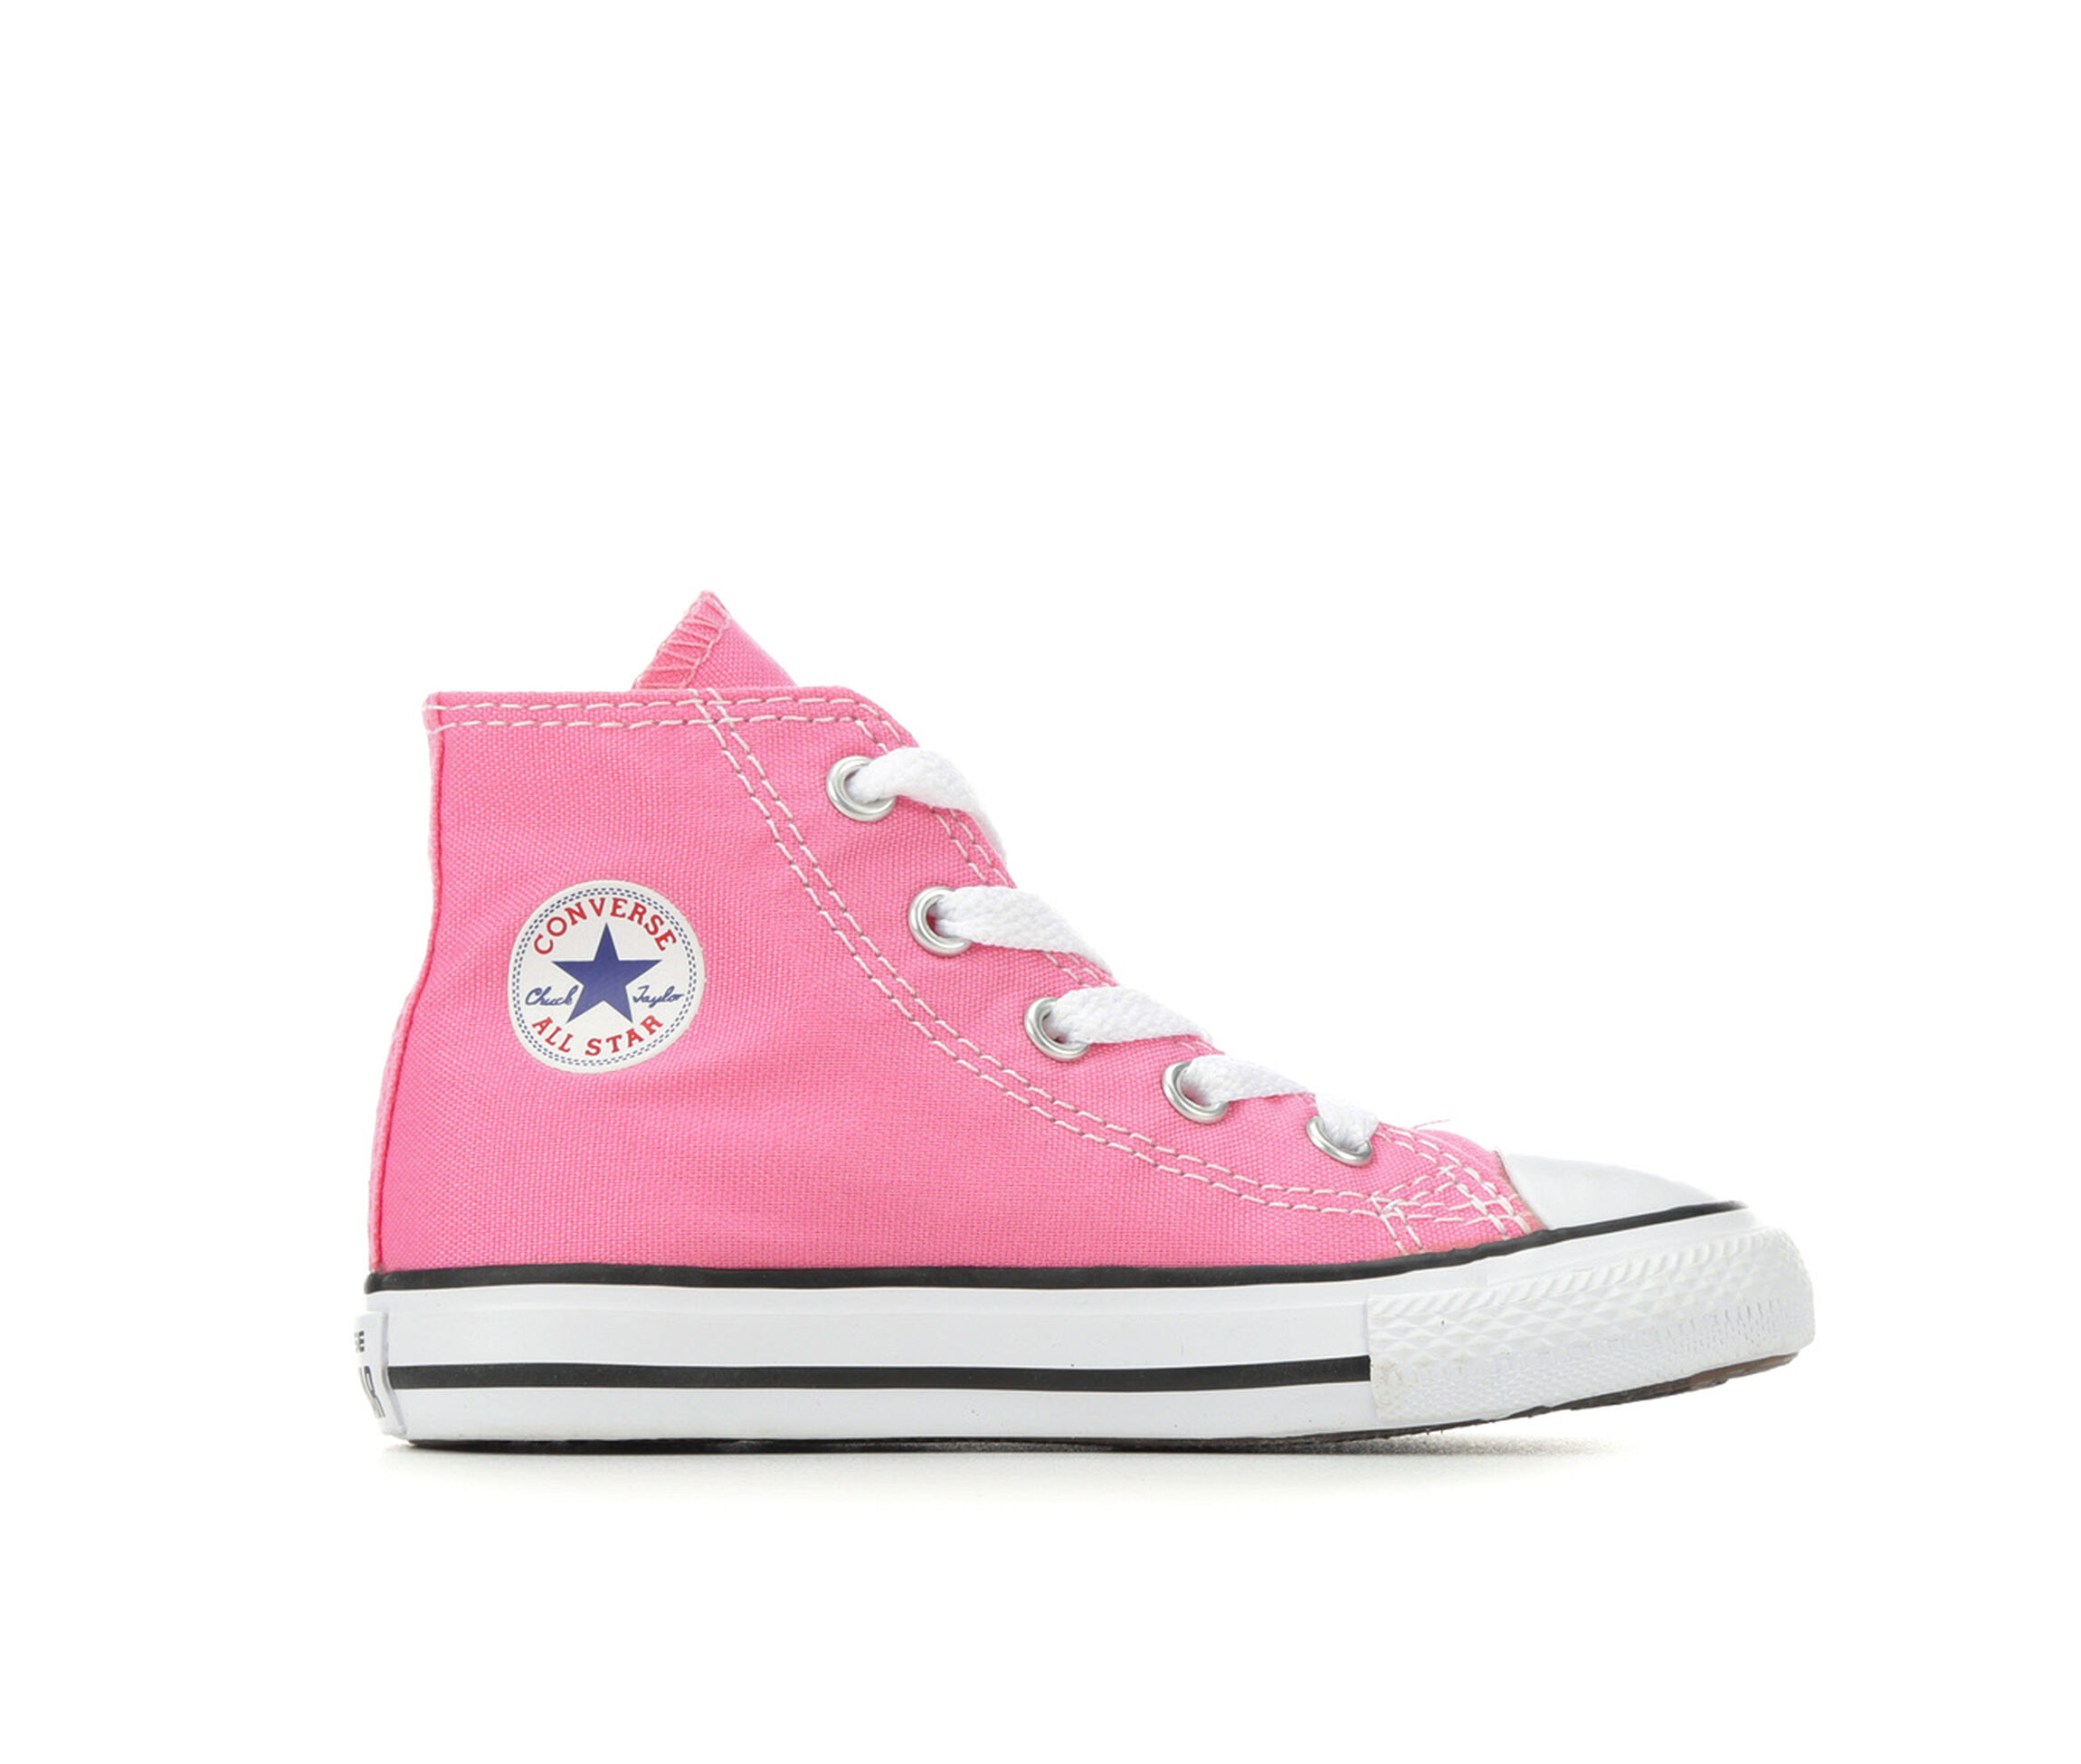 Girls Converse Infant Toddler Chuck Taylor All Star High Top Sneakers